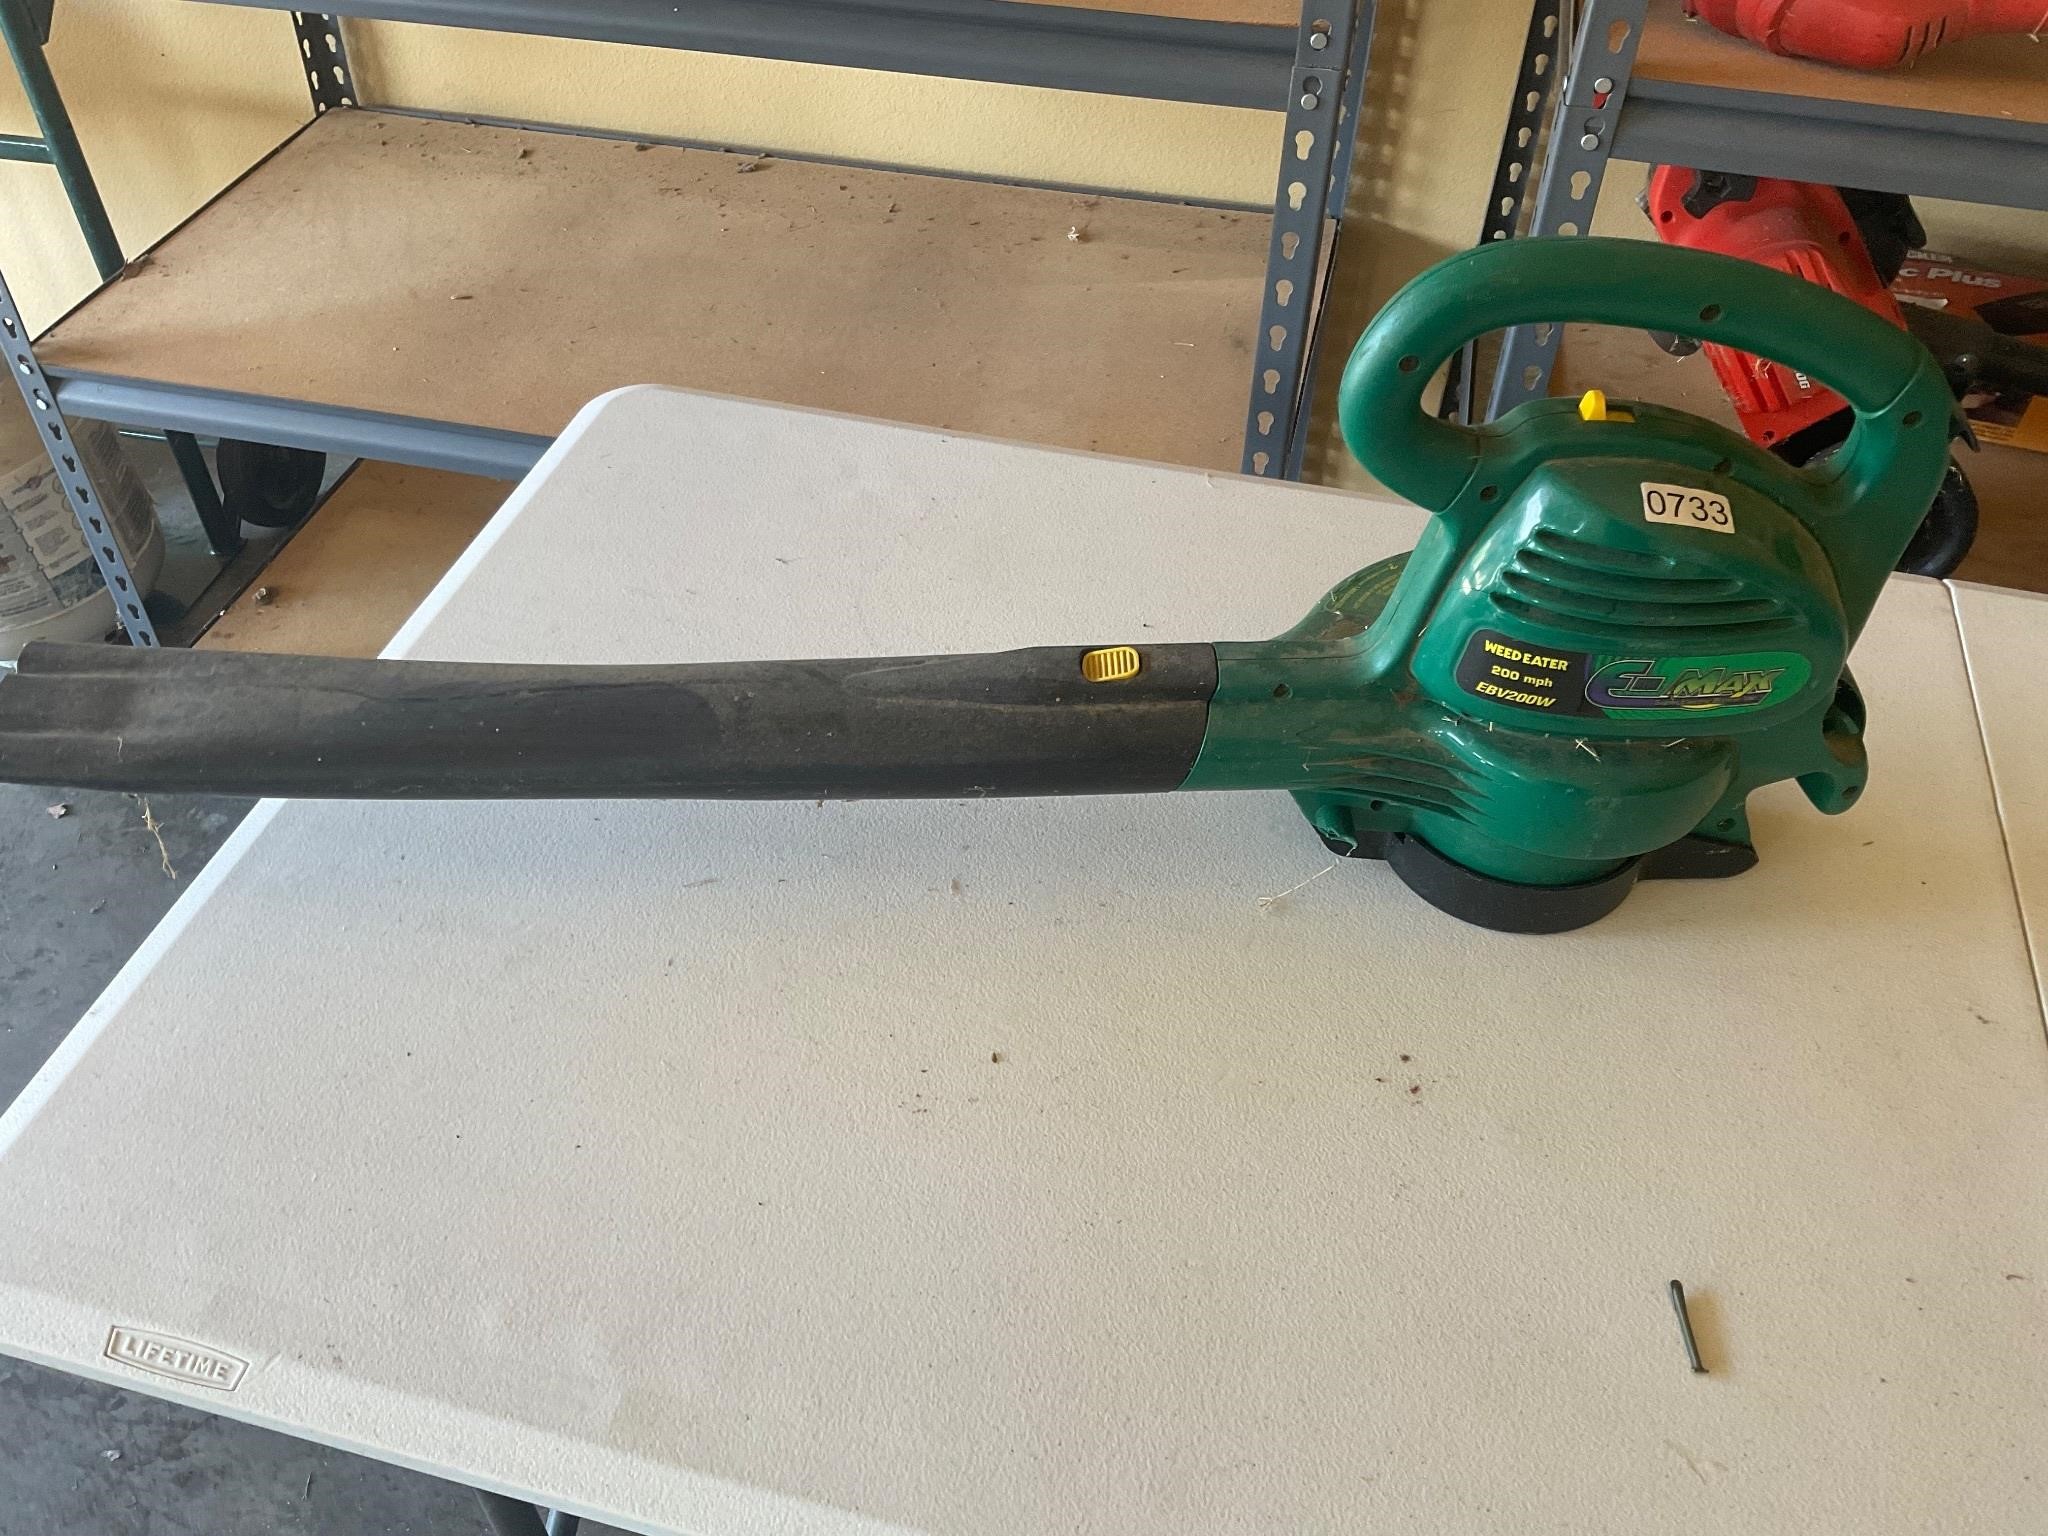 Weed eater electric blower